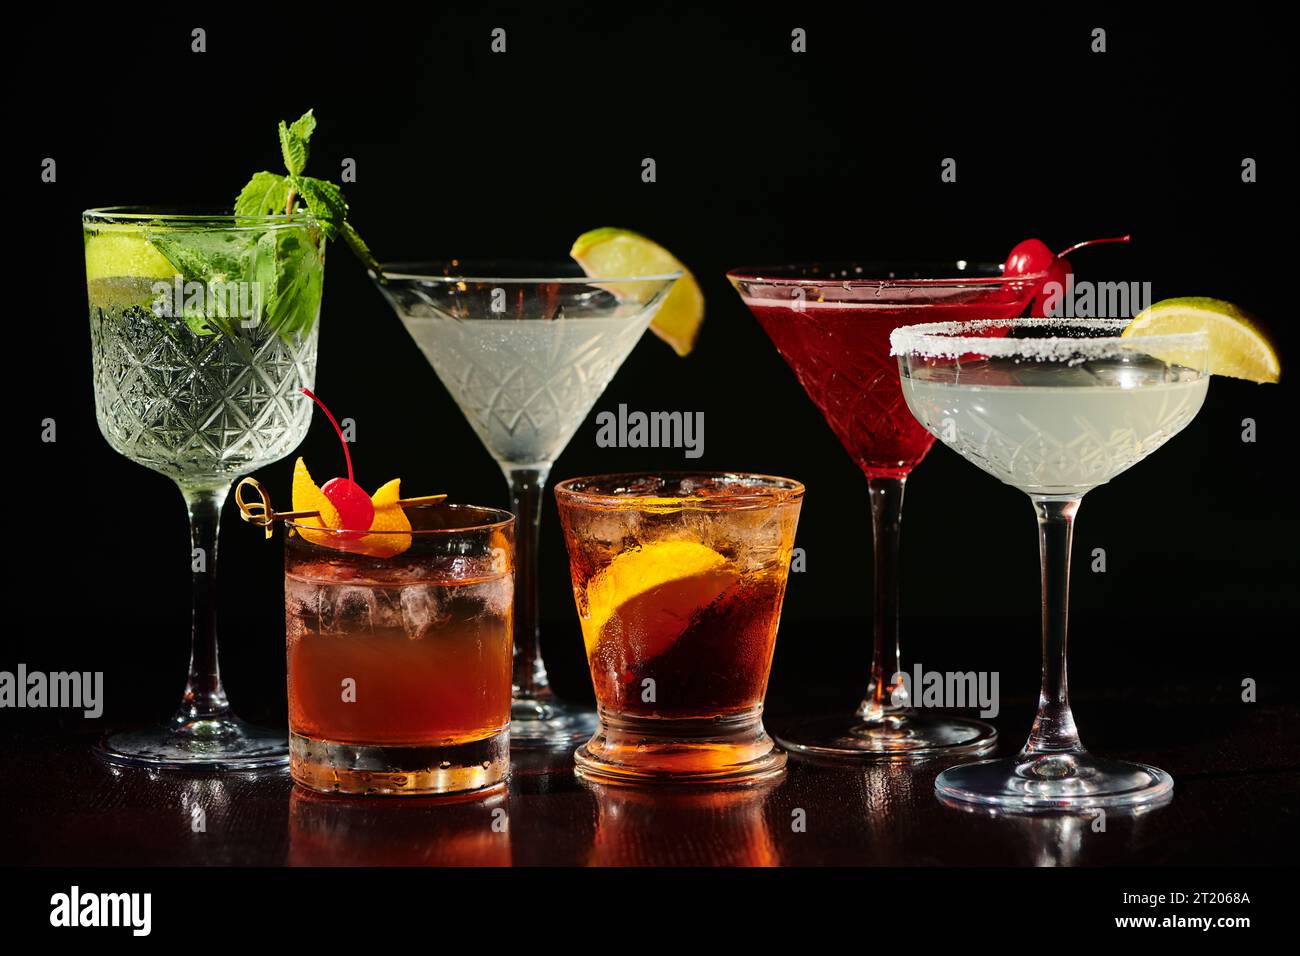 five thirst quenching zesty cocktails with fresh garnishments on black backdrop, concept Stock Photo